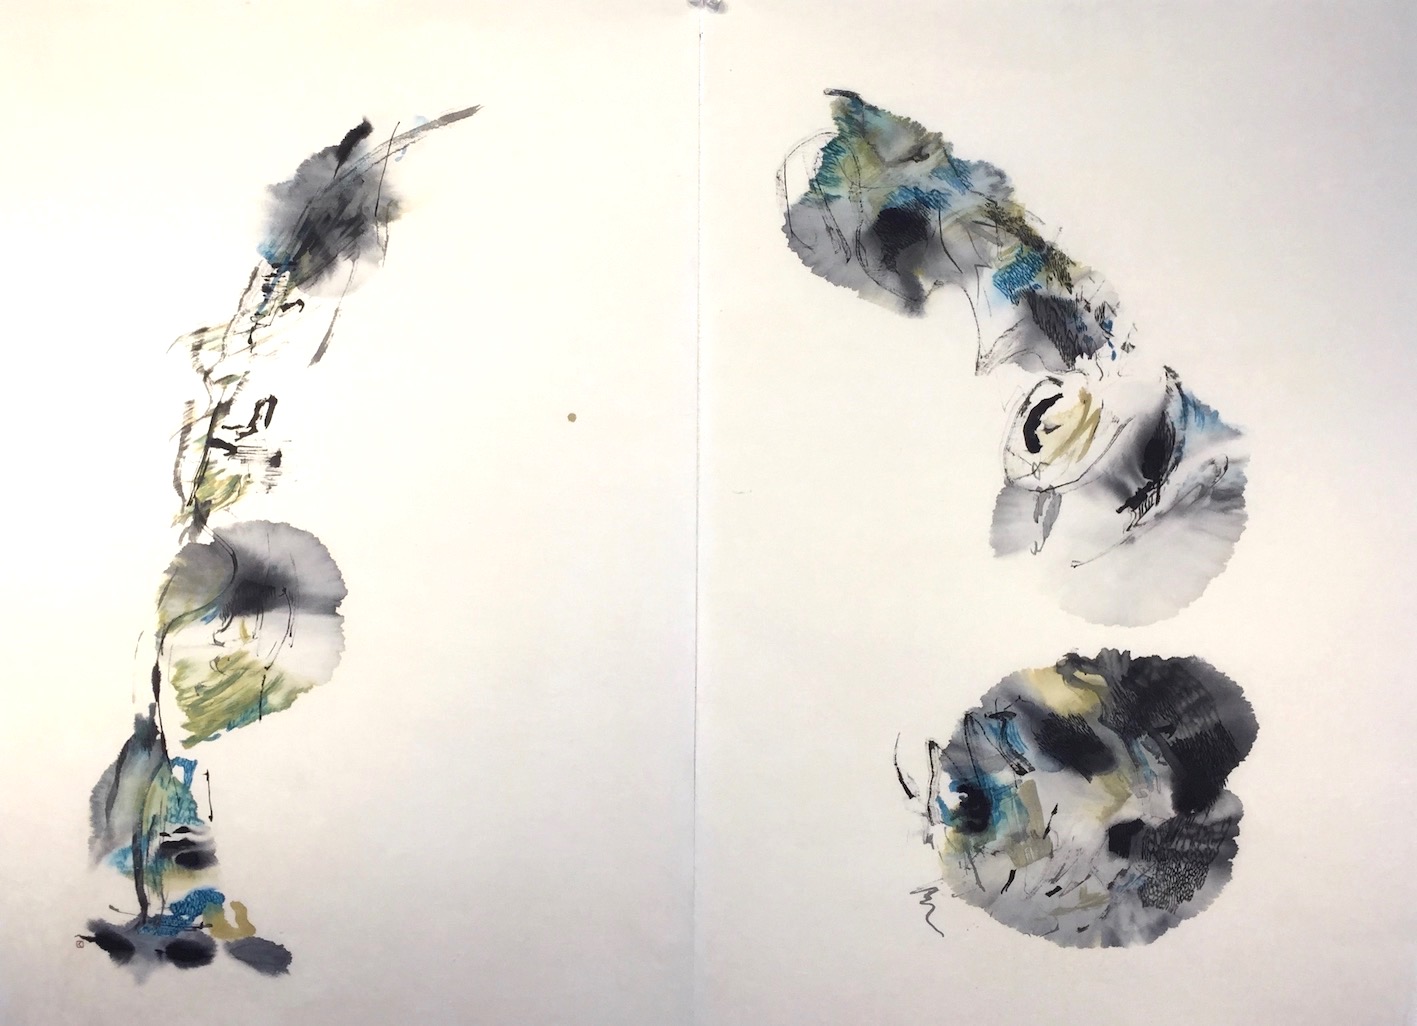 Lines open up 4 開く線 5 73 x 100 cm Sumi ink, water colour, acrylic 墨、水彩、アクリル 2021